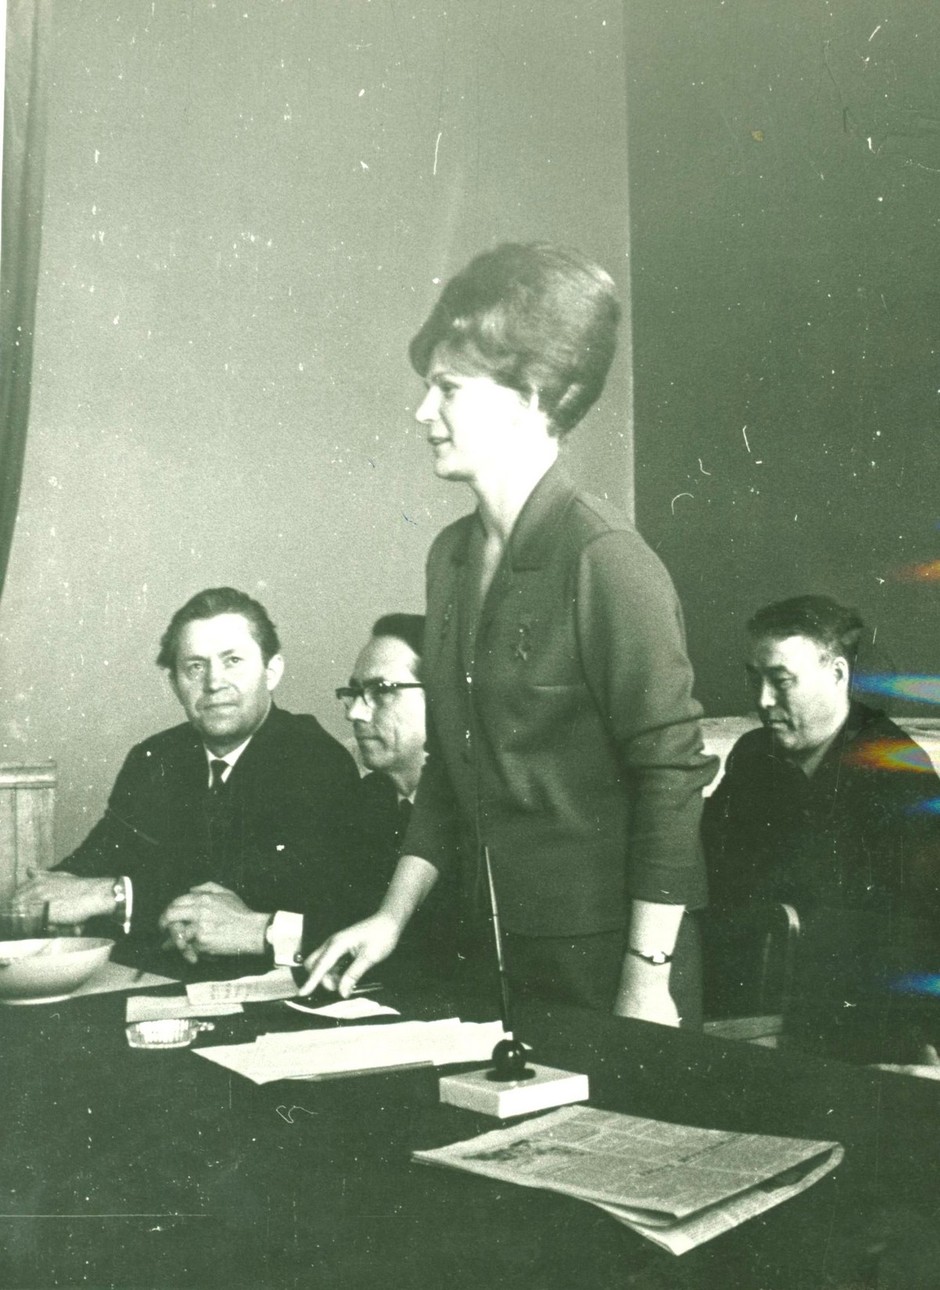 Pilot-cosmonaut V. V. Tereshkova at a meeting with journalists. 2nd from left: chairman of the board of the Union of Journalists of TASSR Sh. Khammatov, 1st from right – editor-in-chief of the magazine Kazan Utlary Z. Nuri, Kazan. March, 1966